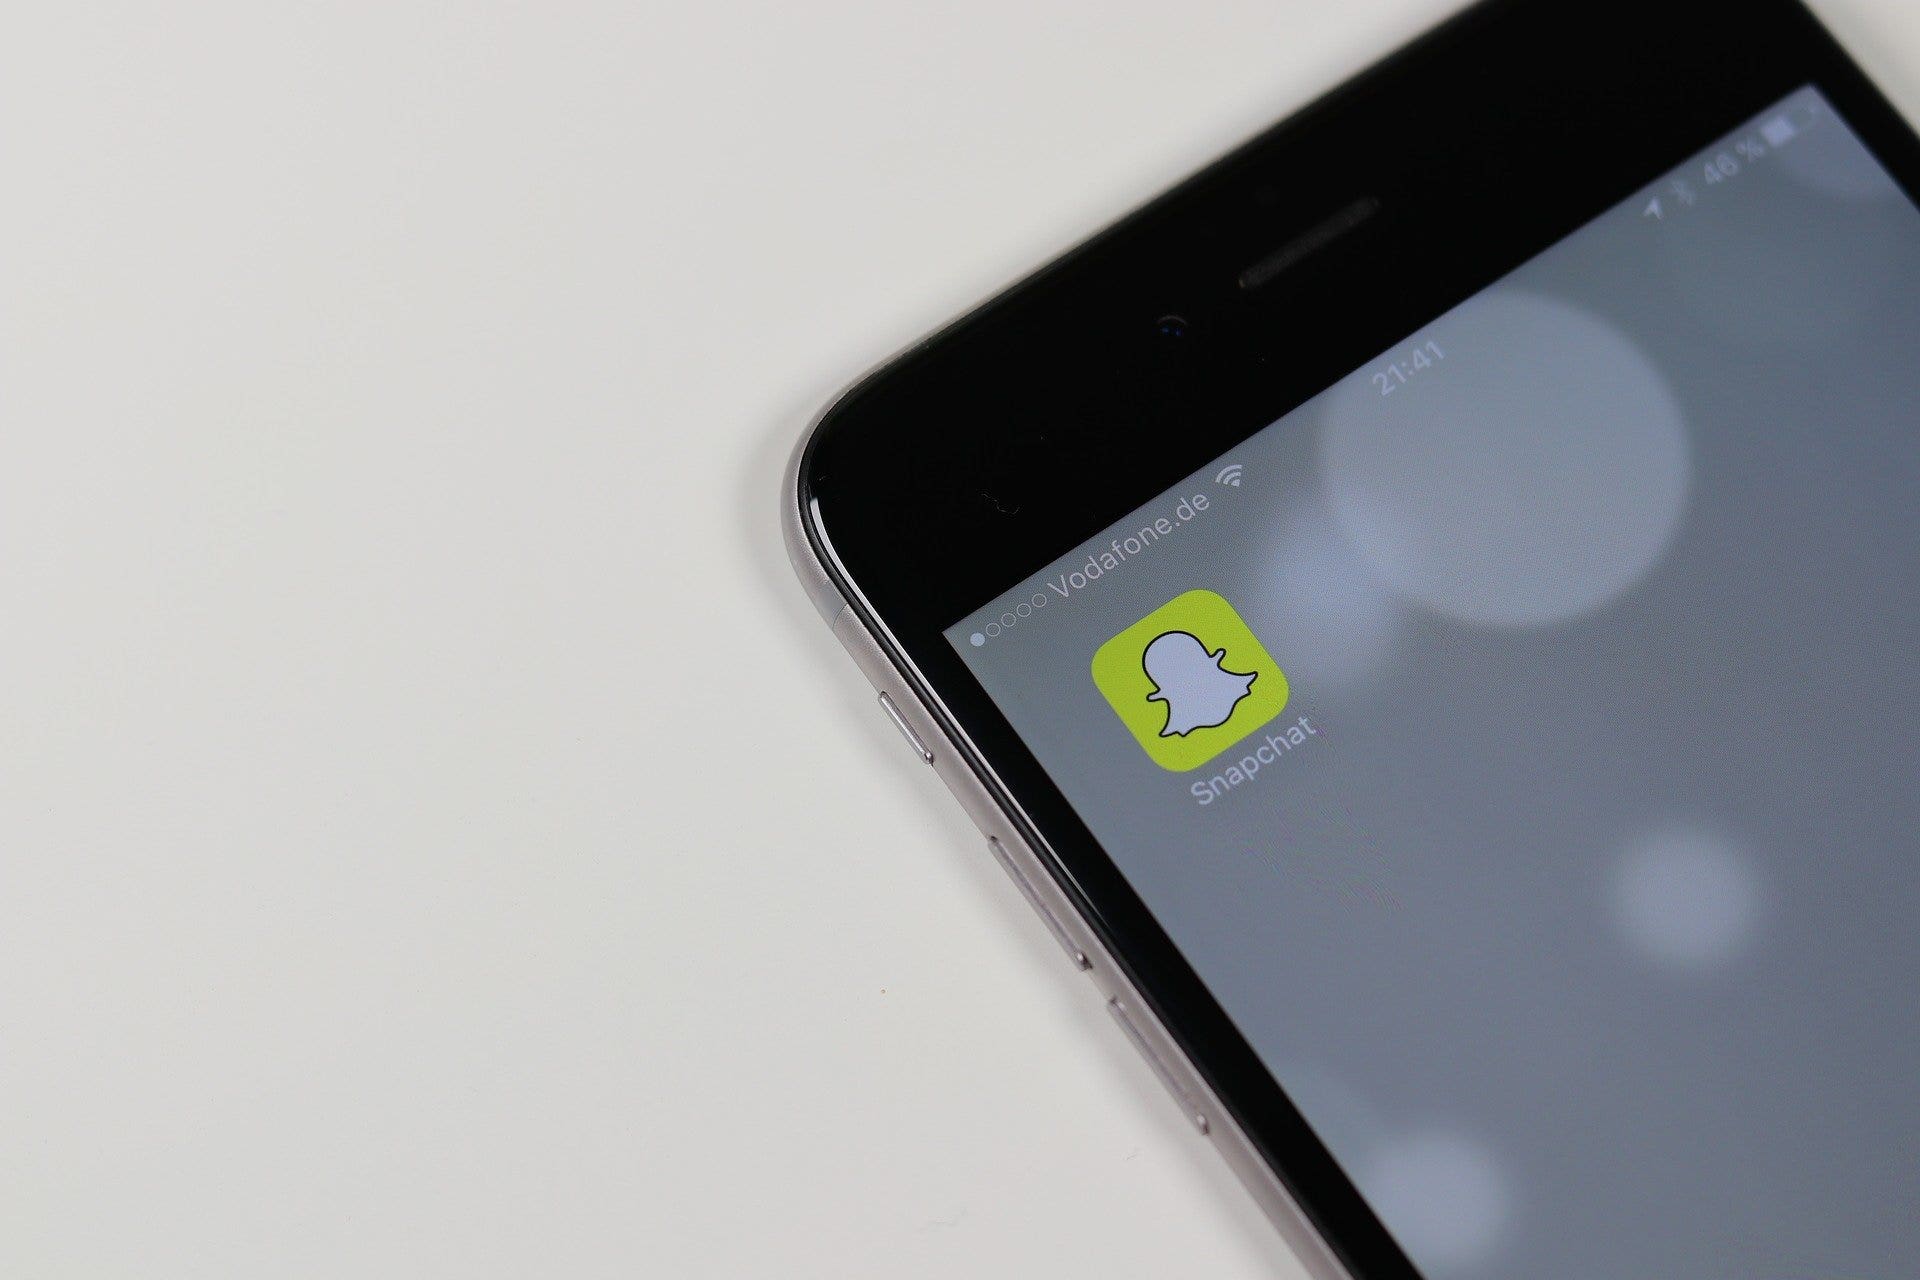 Snapchat's Stock Soars On Strong Q3 User Growth